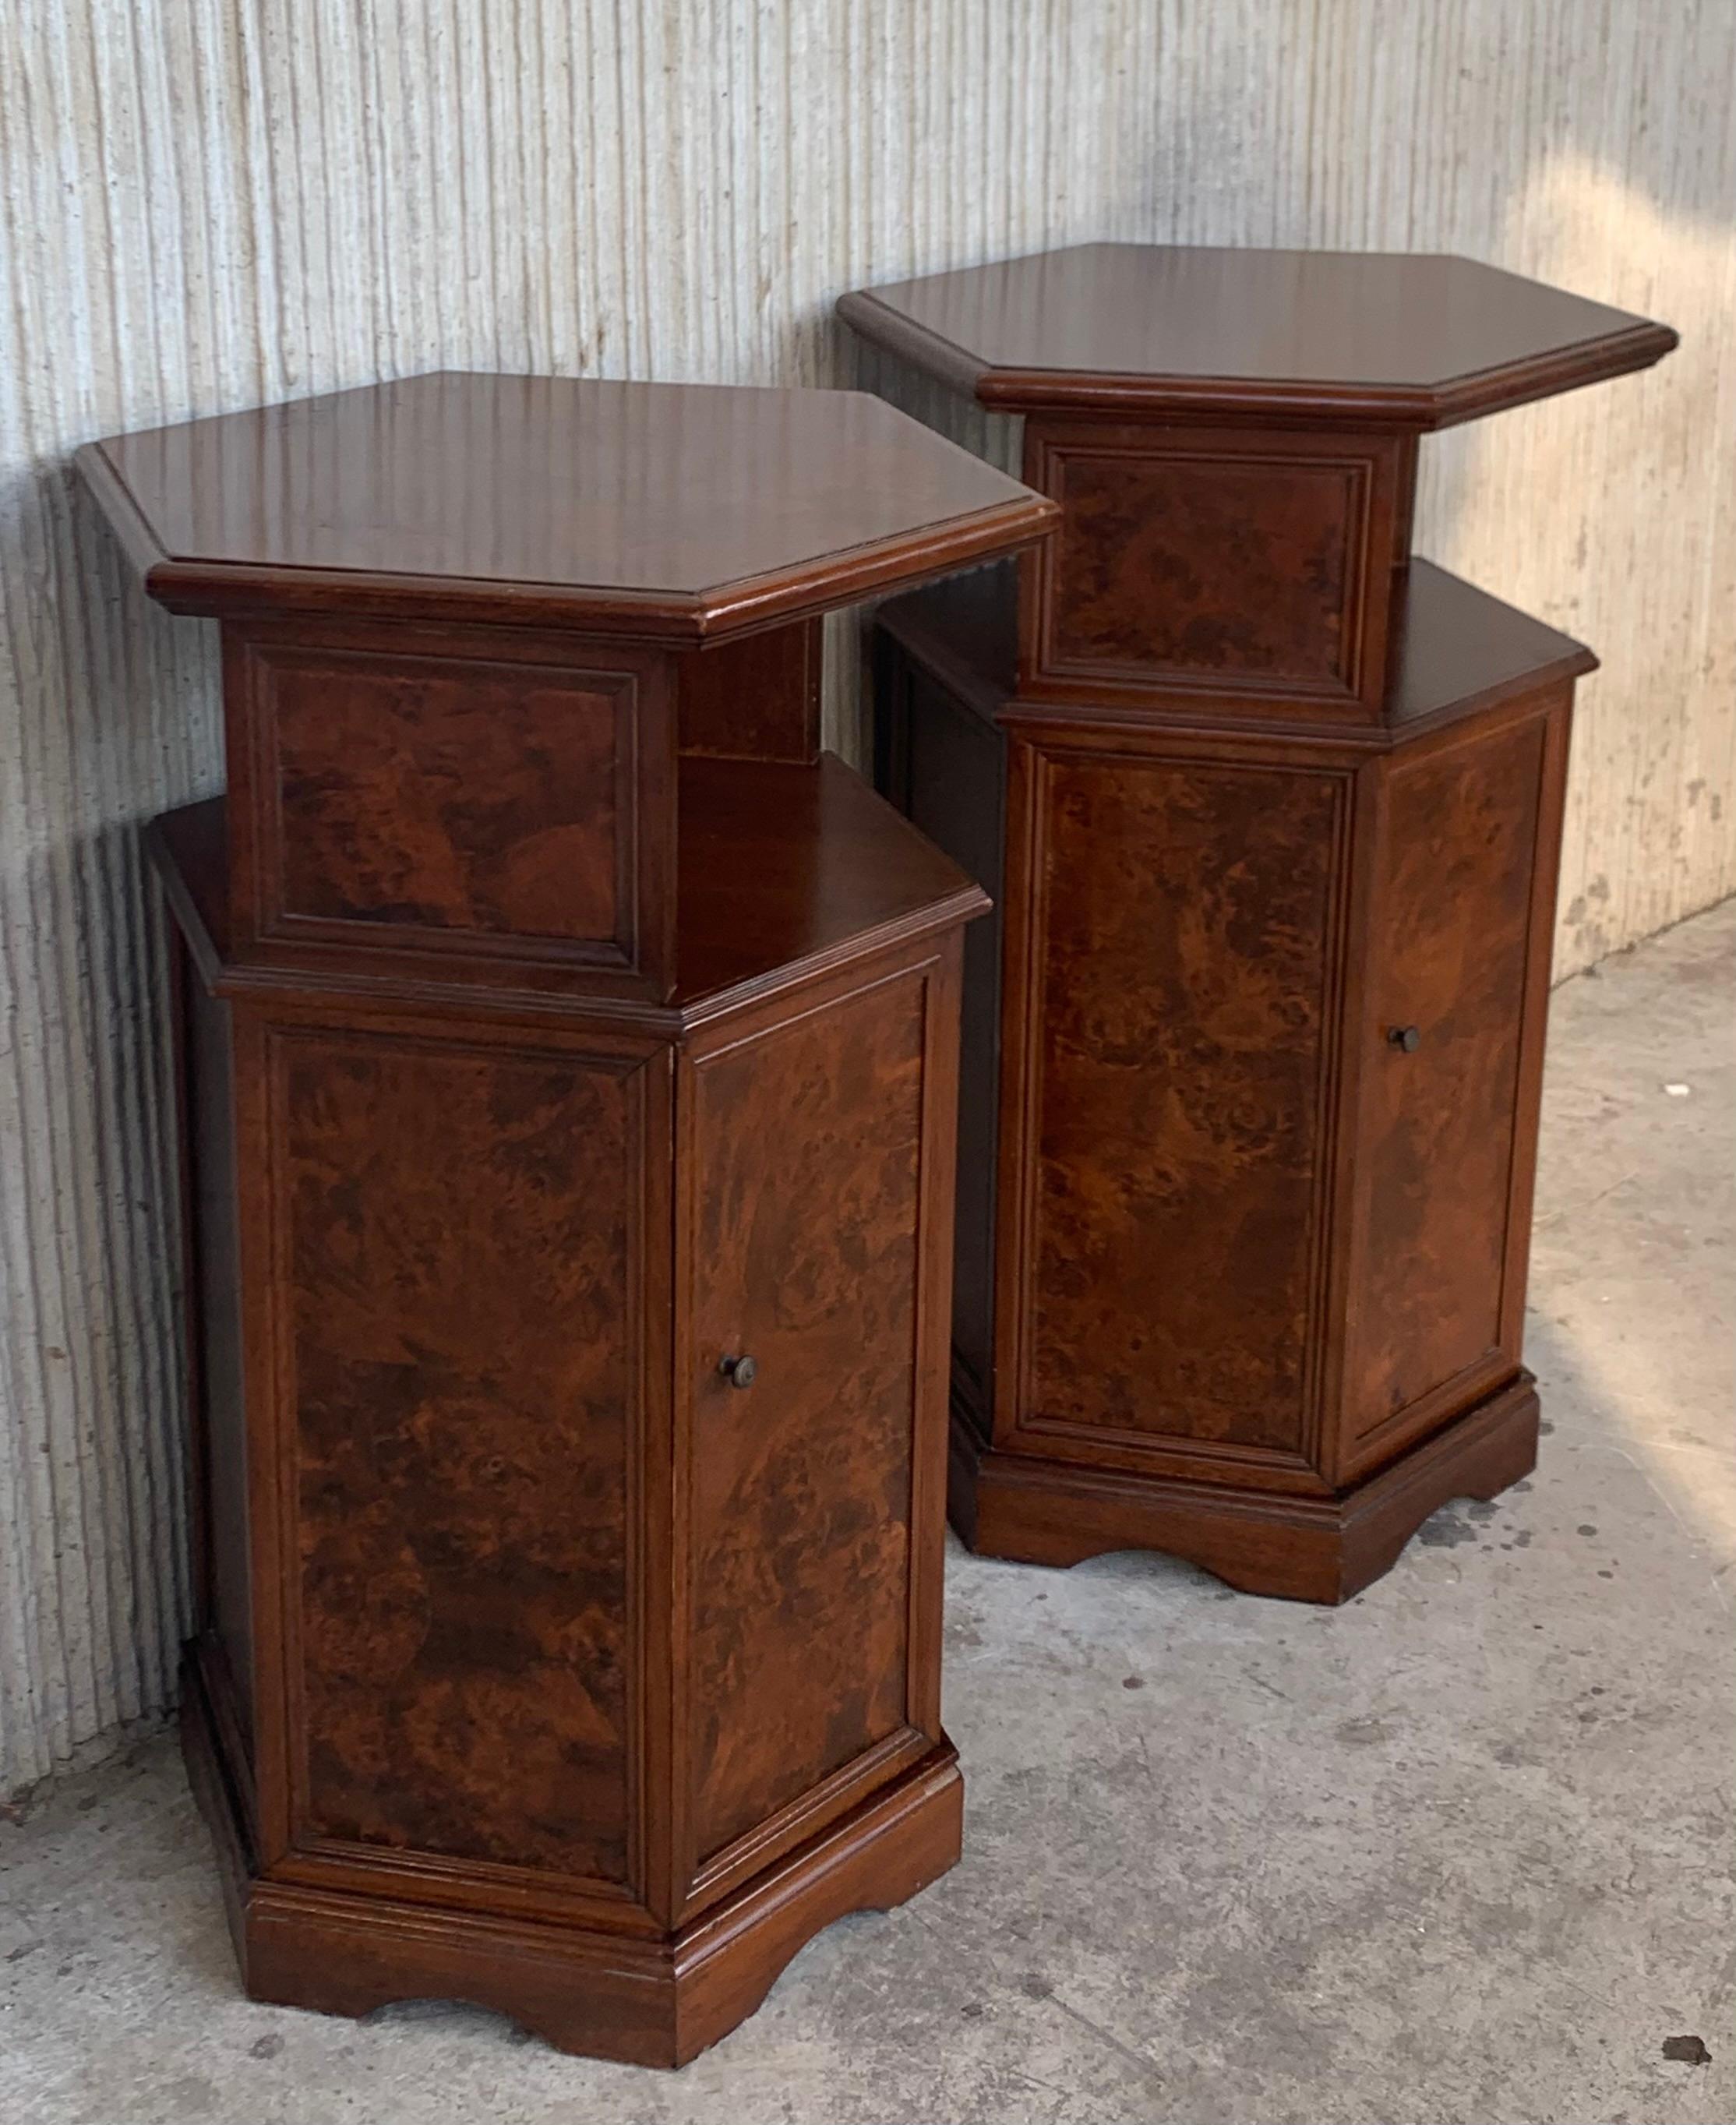 1900s Italian Hexagonal Pedestal Pilar Maple Cupboards End Tables, a Pair In Good Condition For Sale In Miami, FL